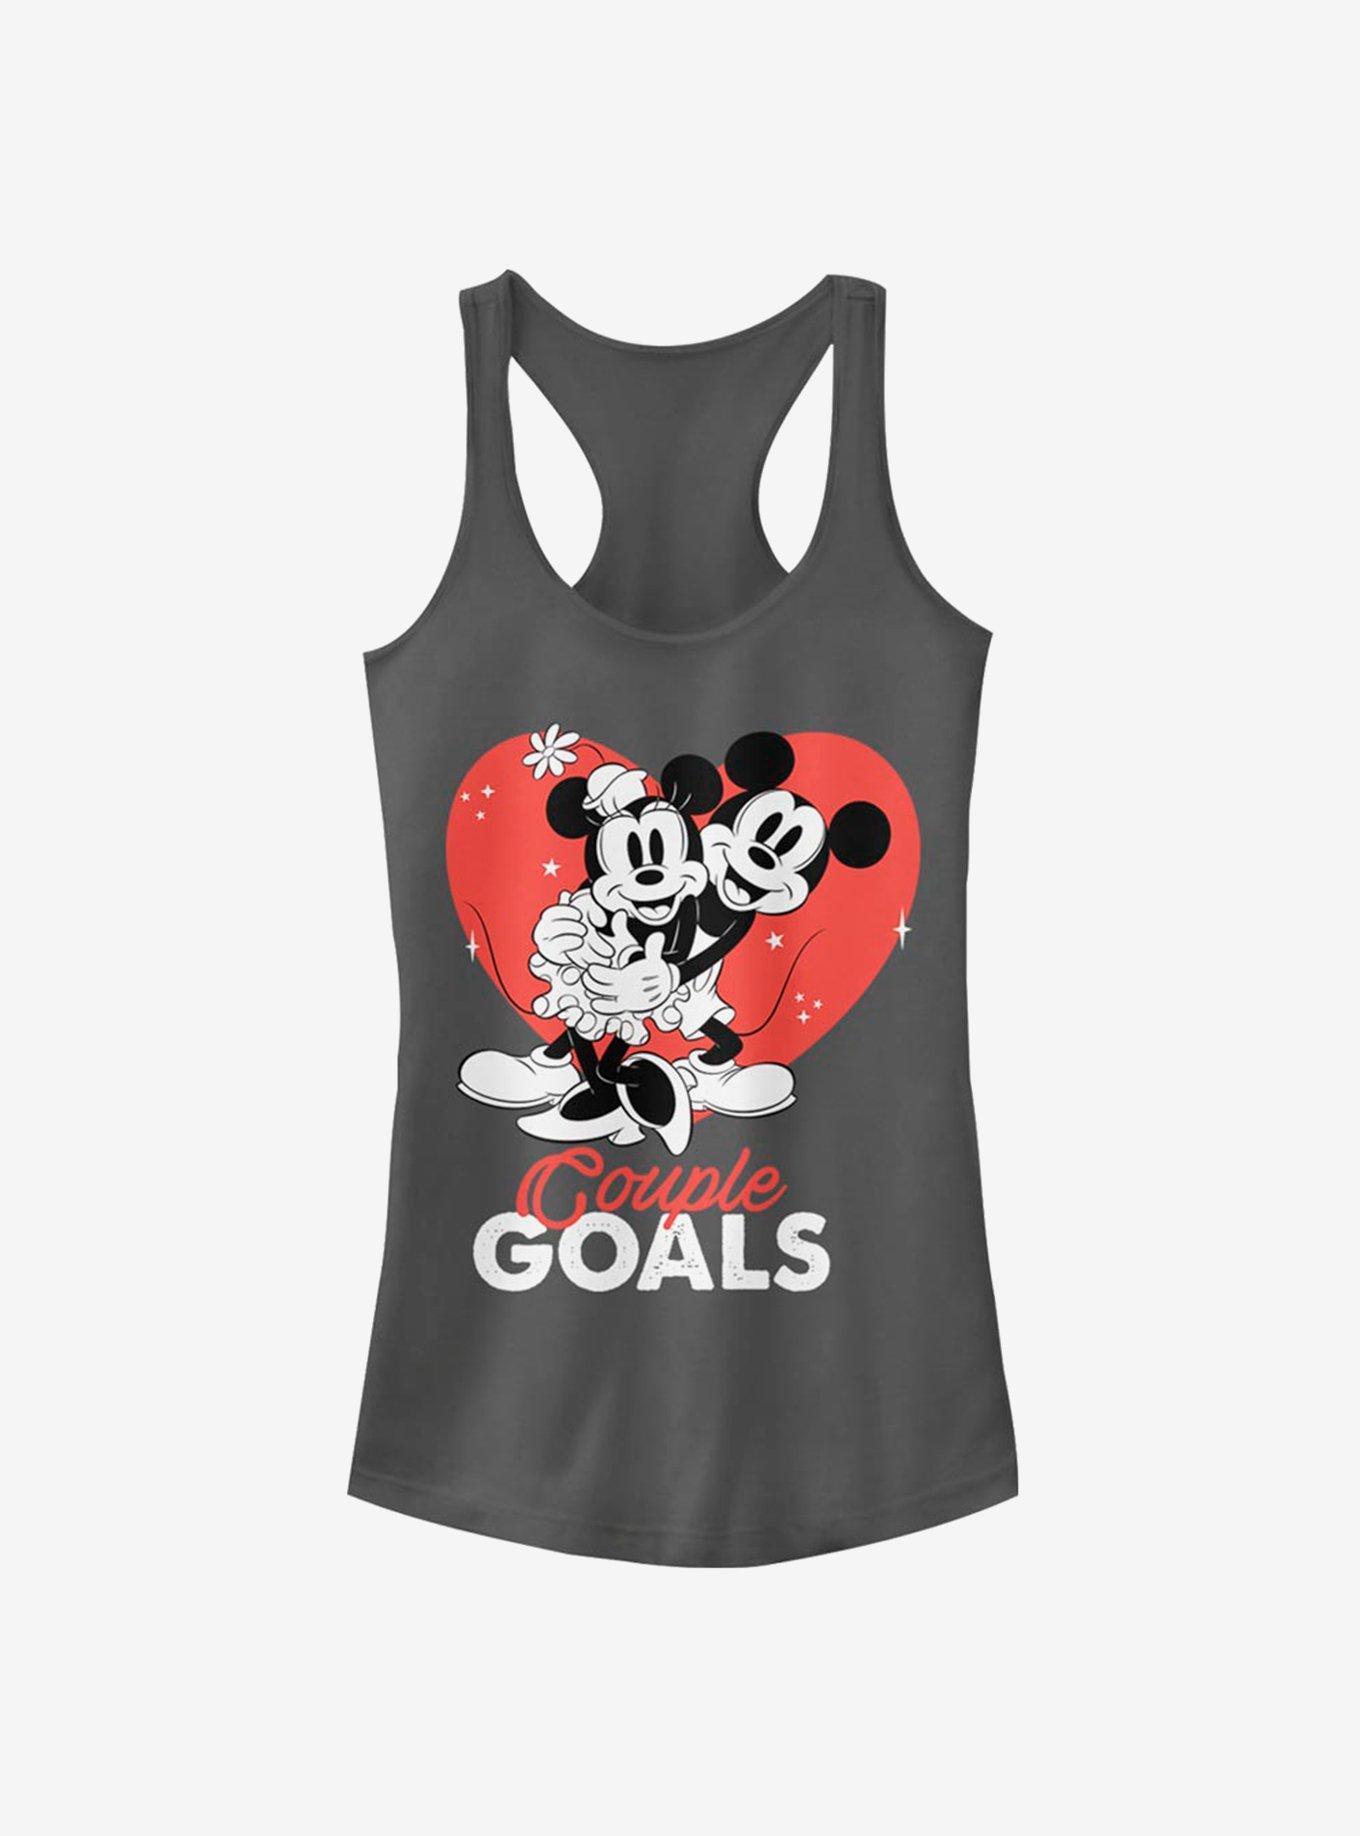 Disney Mickey Mouse & Minnie Mouse Couple Goals Girls Tank Top